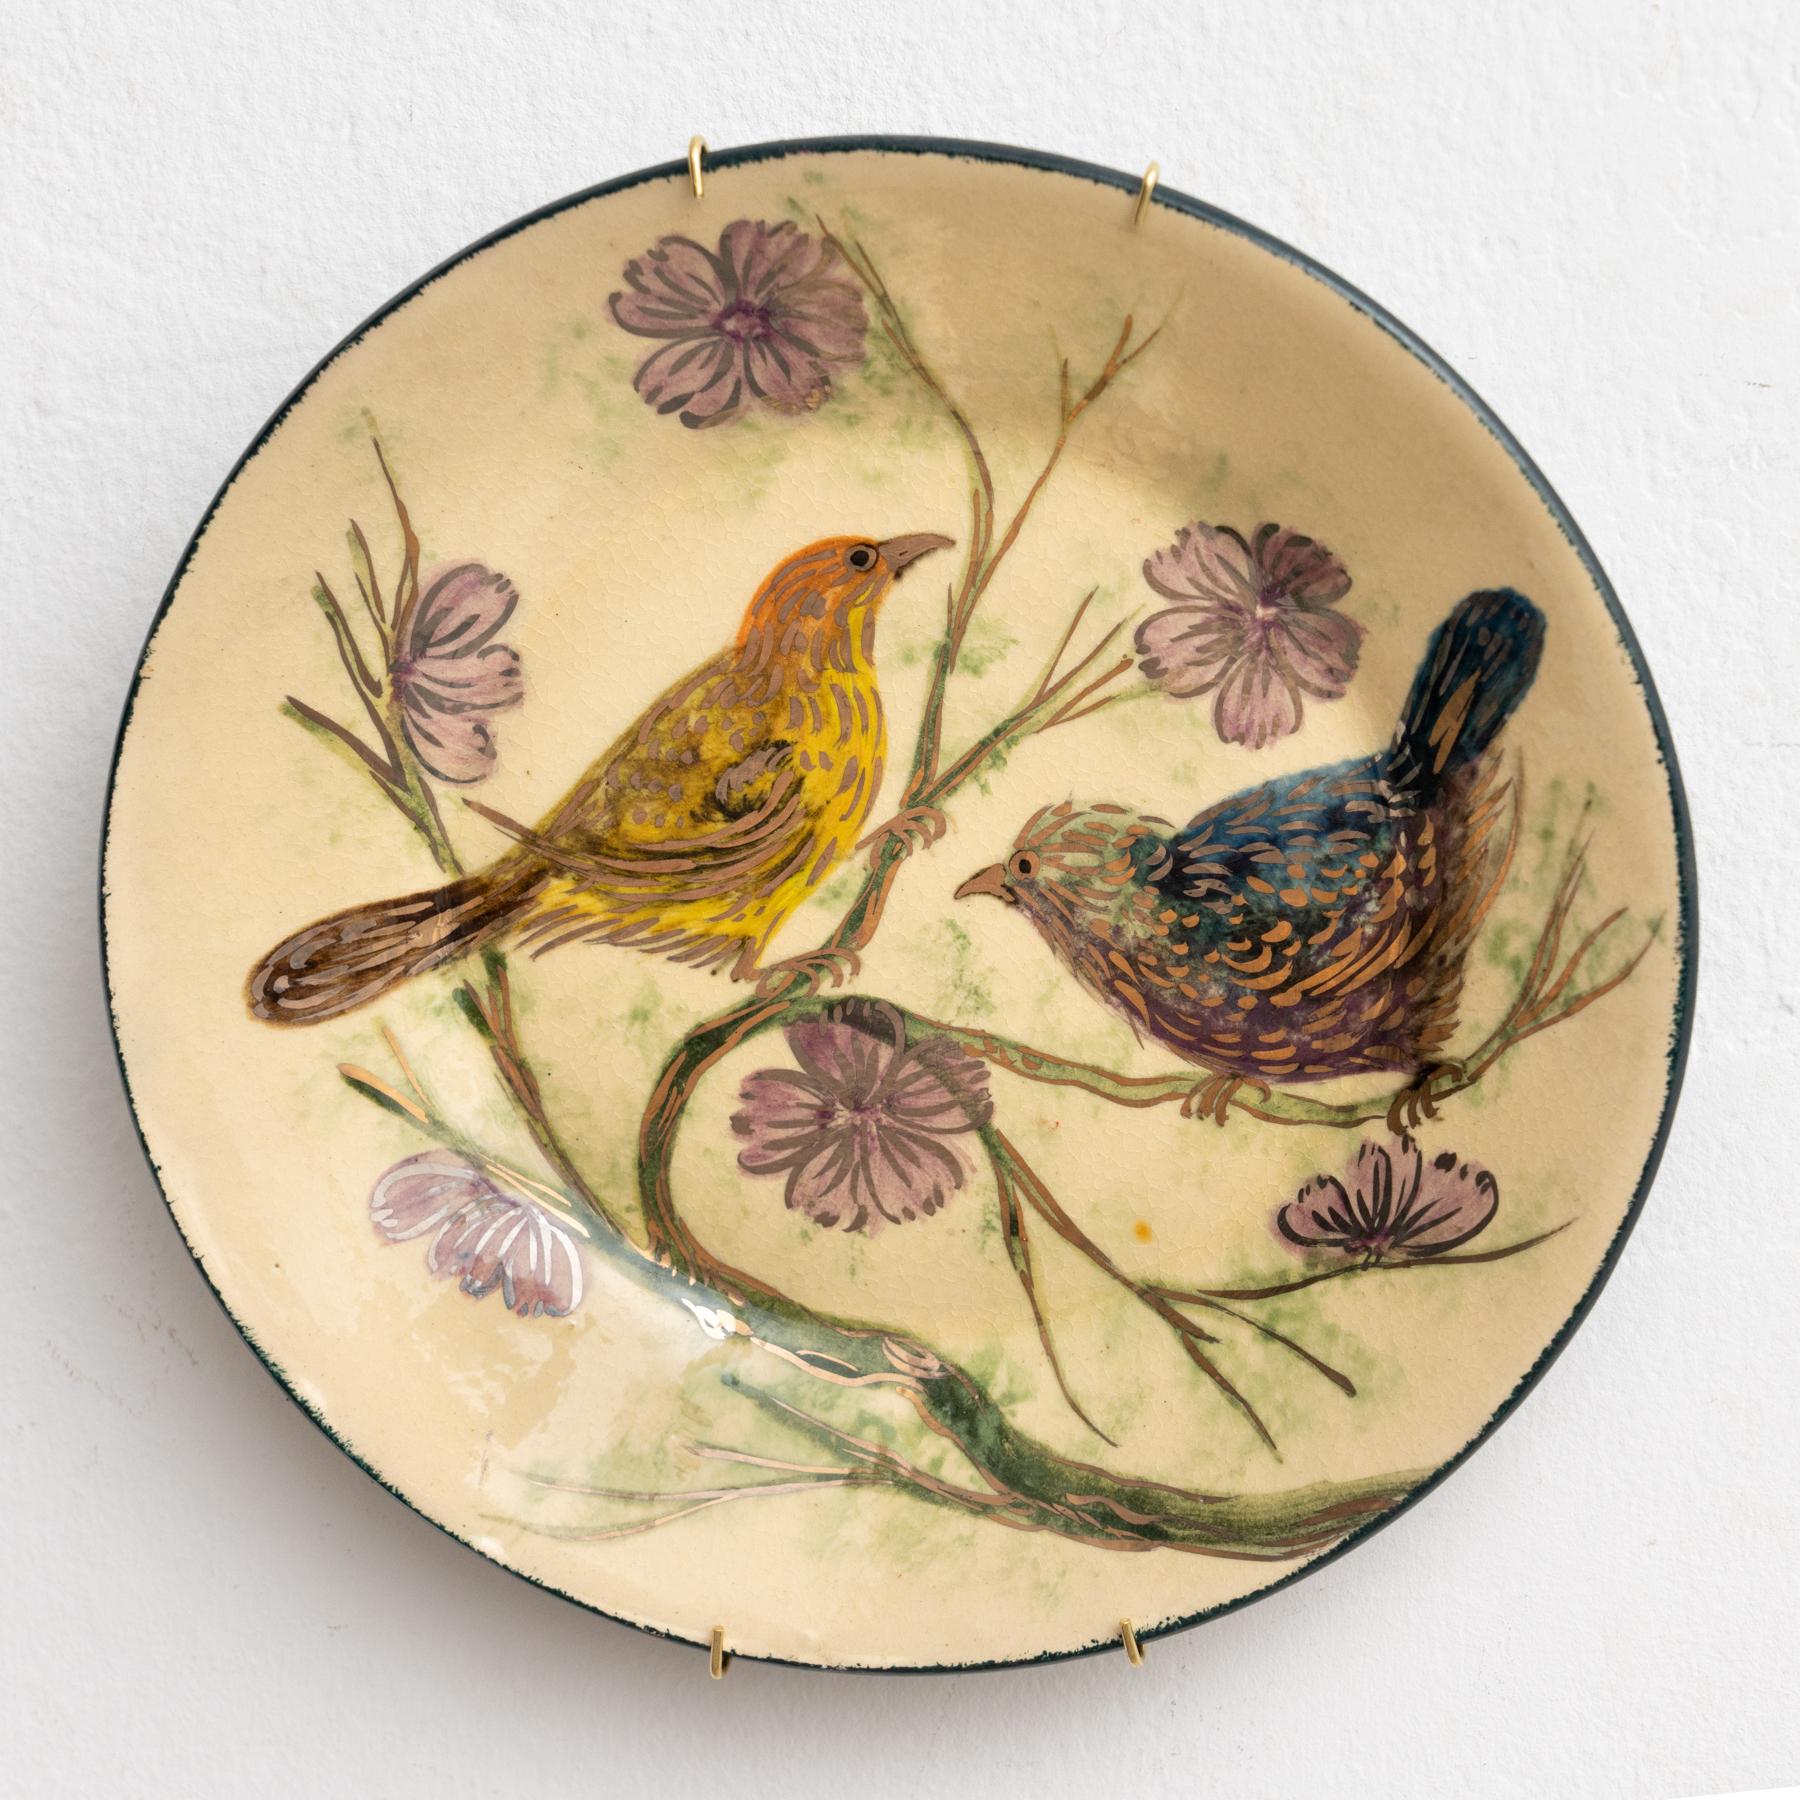 Ceramic Traditional Hand Painted Plate by Catalan Artist Diaz COSTA, circa 1960 For Sale 9